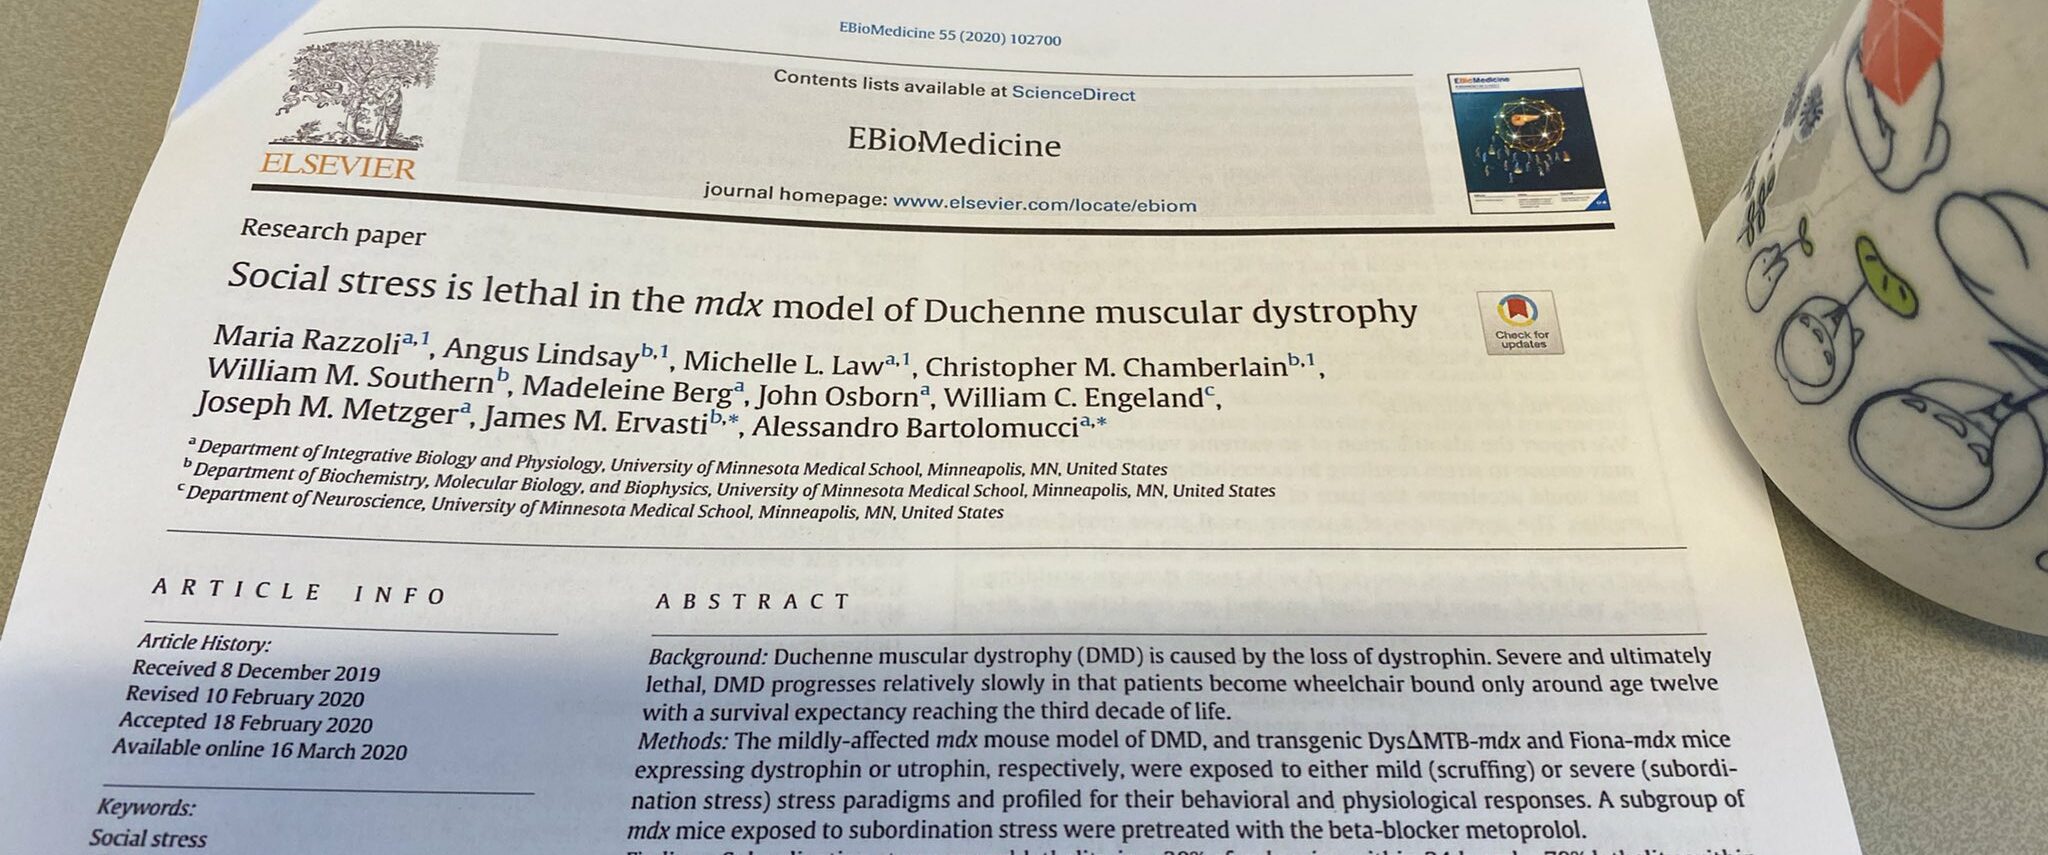 Social stress is lethal in the mdx model of Duchenne muscular dystrophy